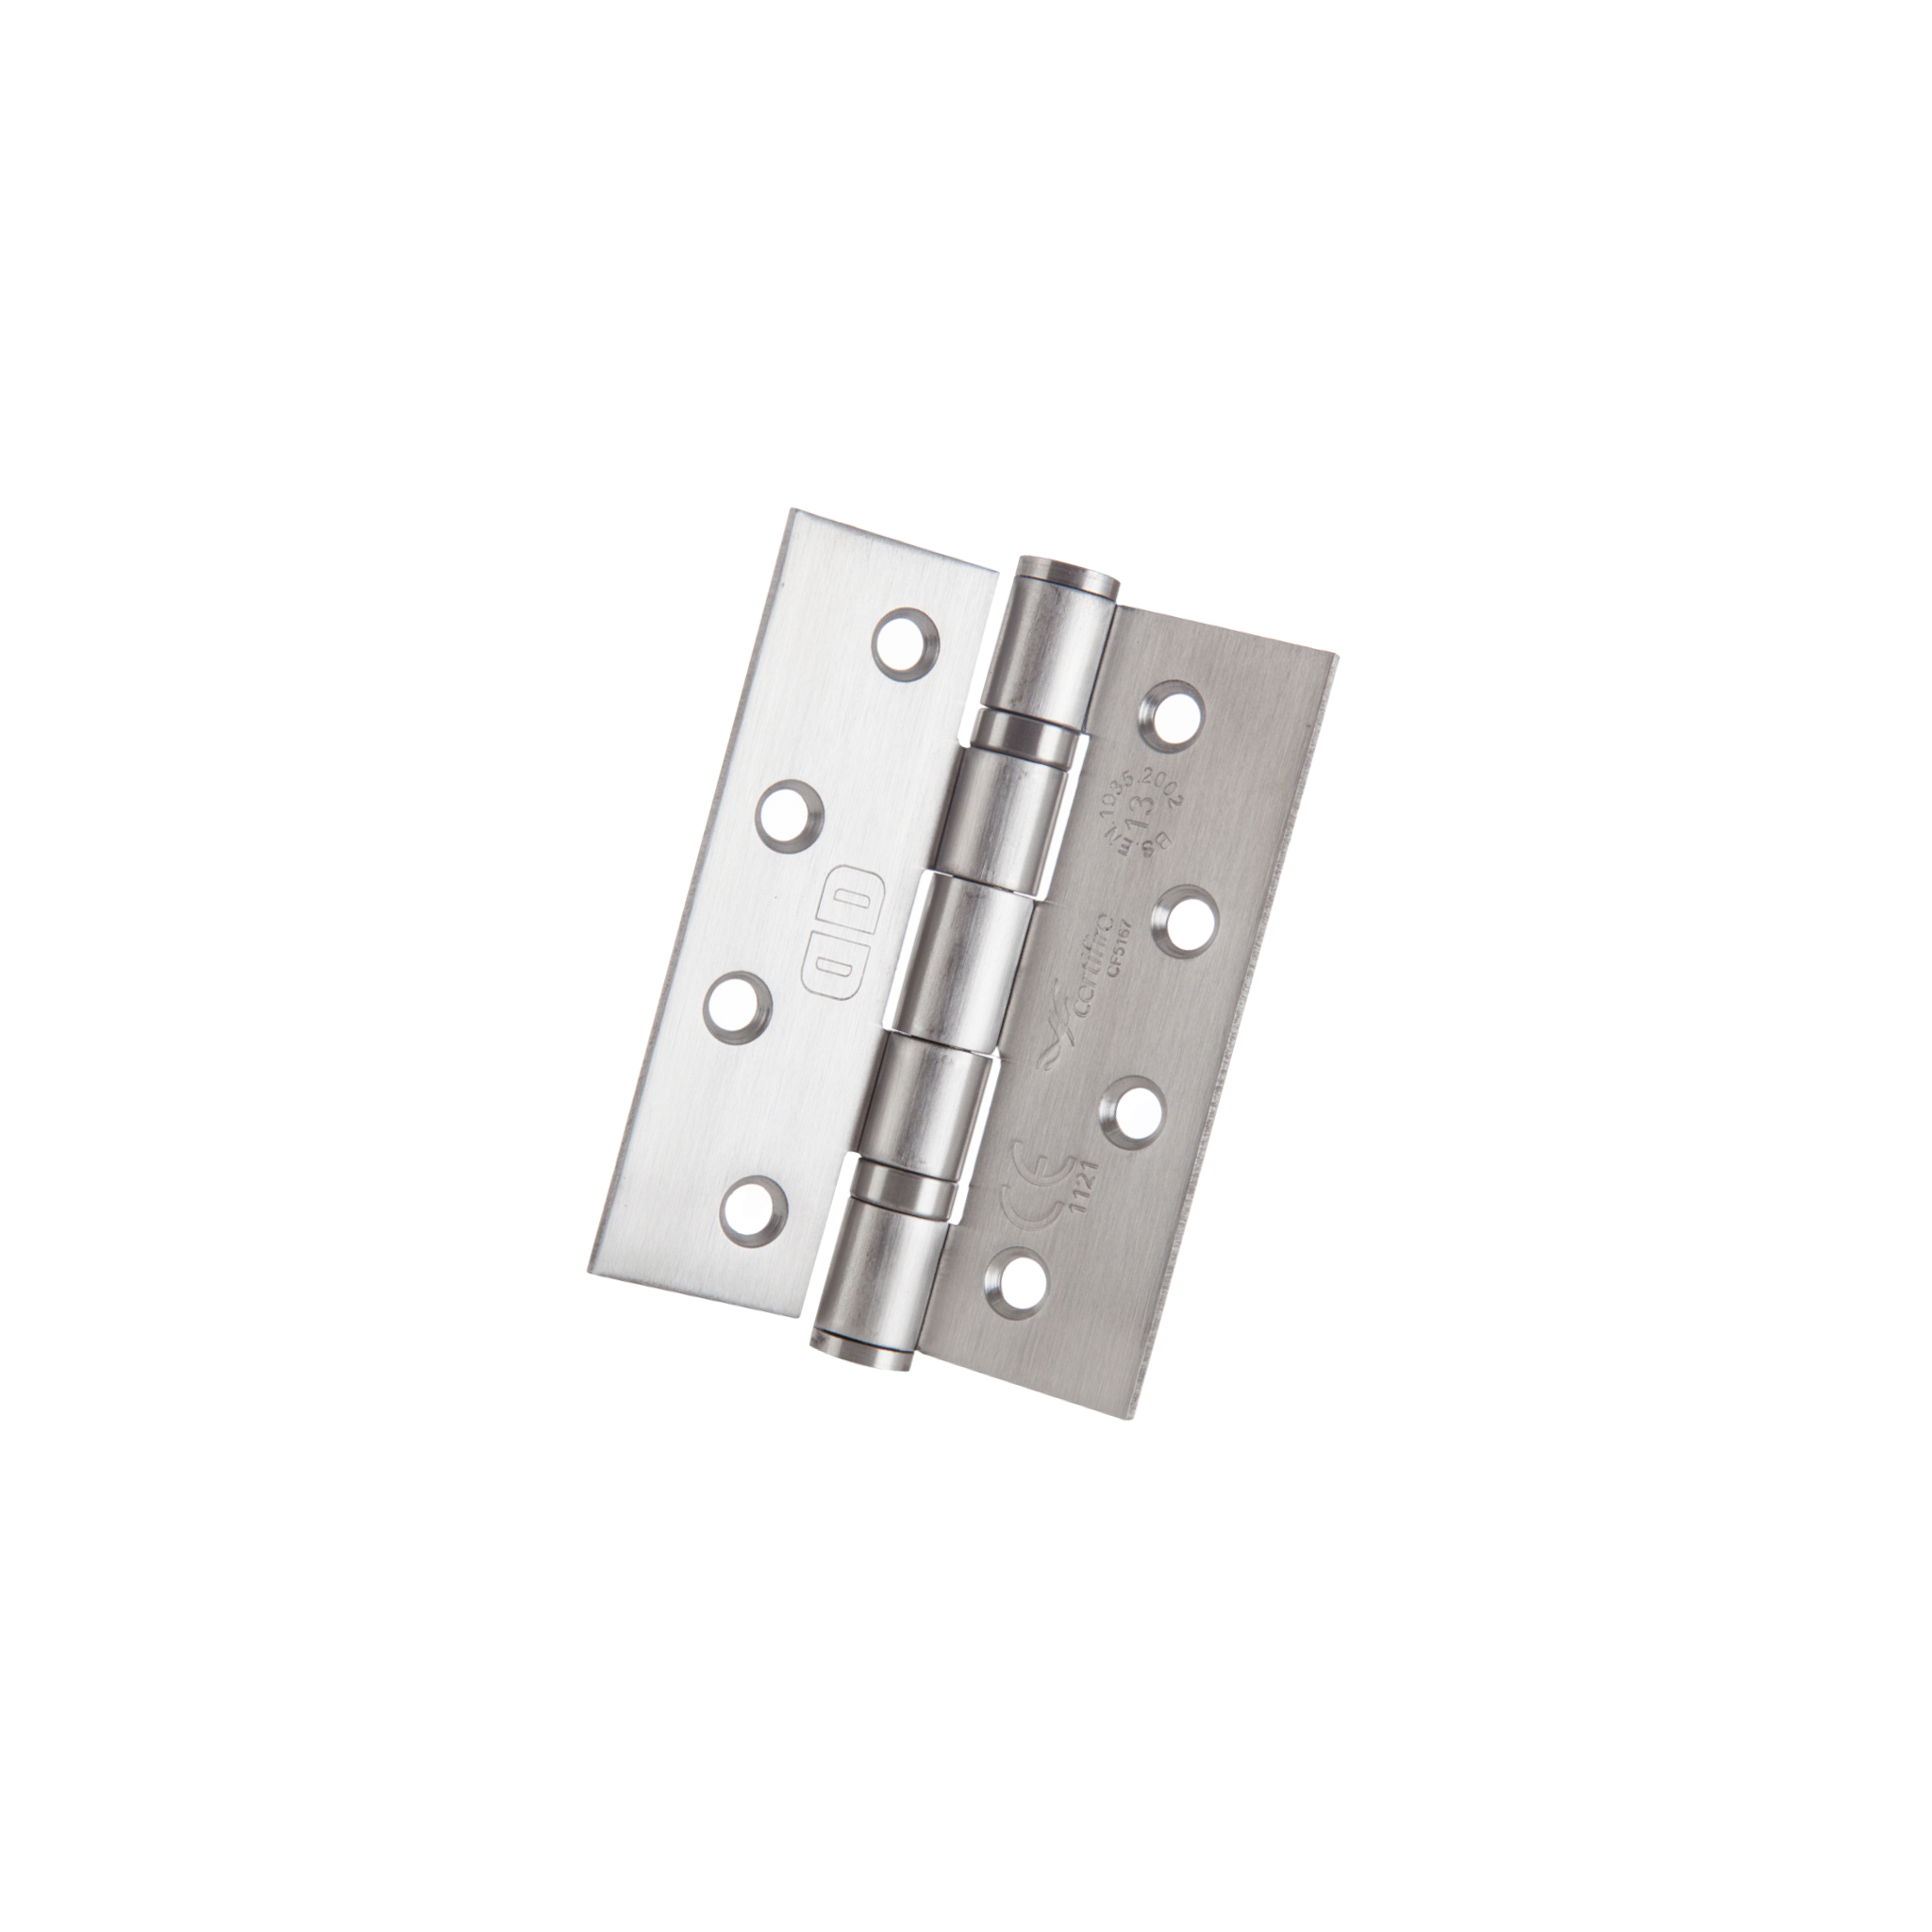 DBB-SS-009, Butt Hinge, Two Ball Bearing, 2 x Hinges (1 Pair), Max Door Weight: 80kg, 102mm (h) x 75mm (w) x 3mm (t), Stainless Steel, DORMAKABA